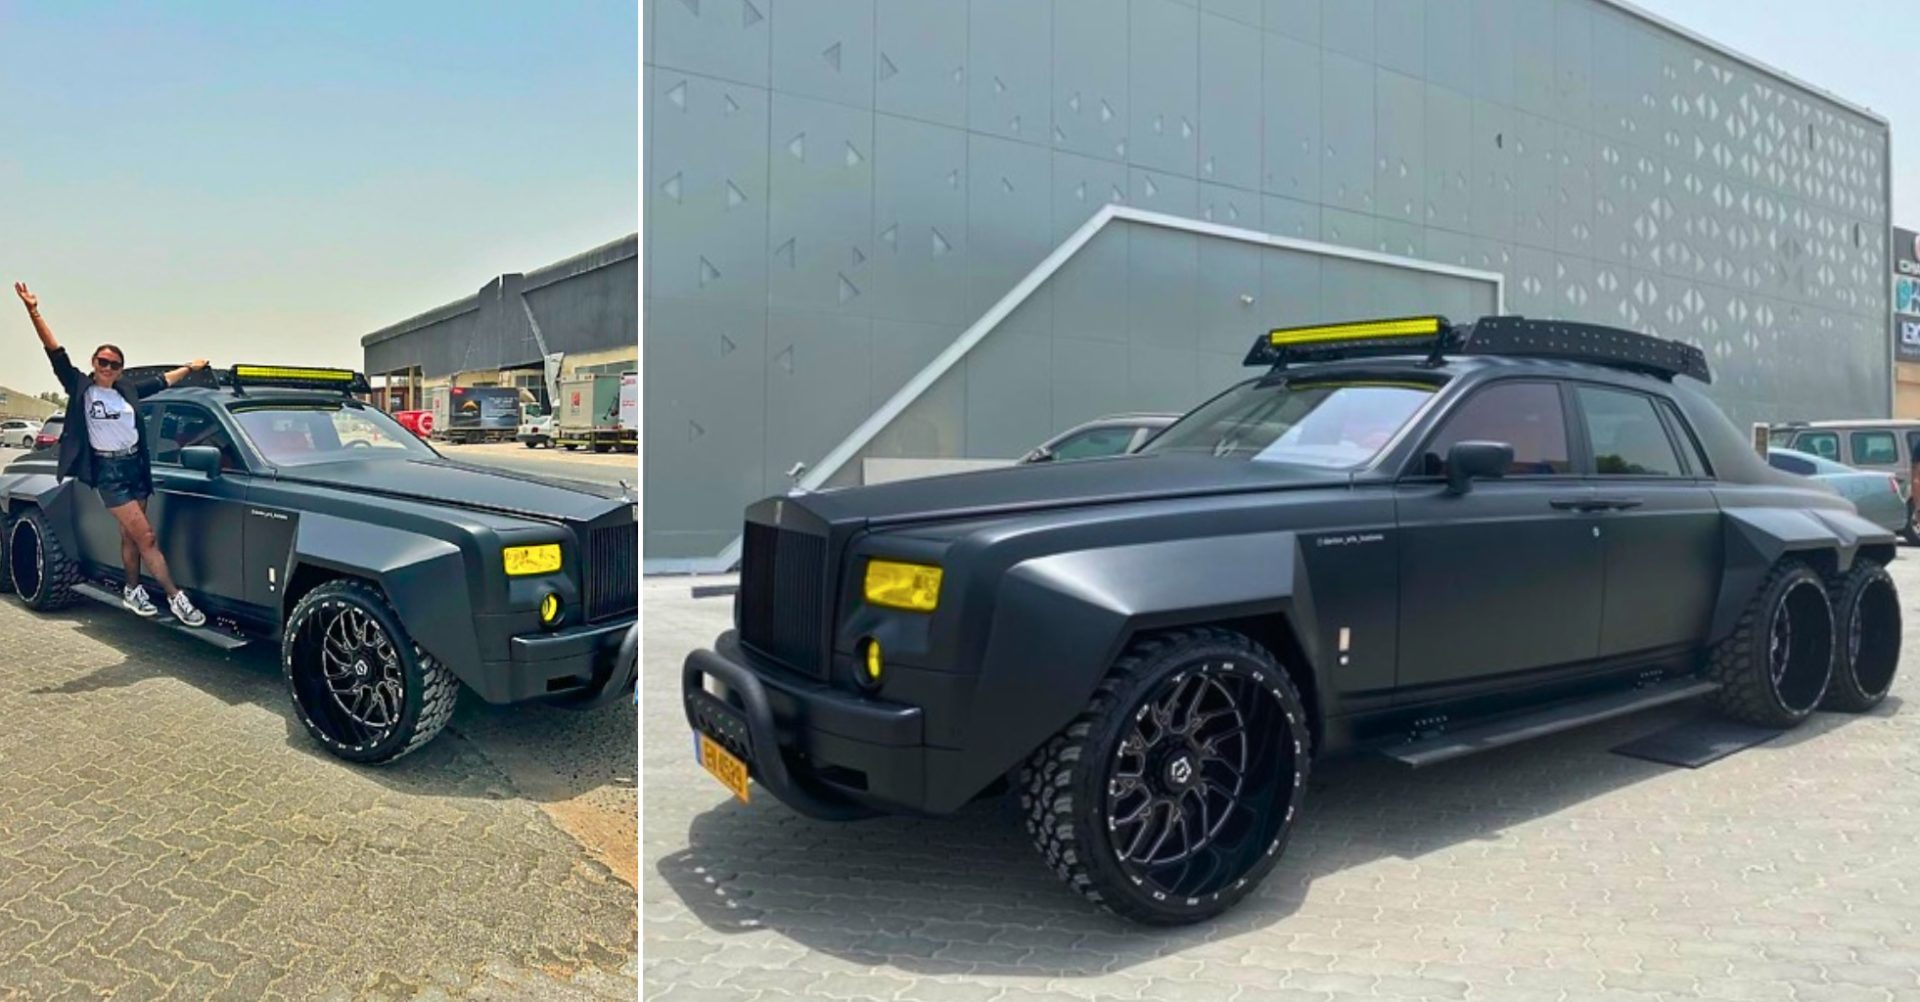 A monster six-wheel off-road Rolls-Royce Phantom with crocodile leather steering wheel and gold-plated brakes - Latest News